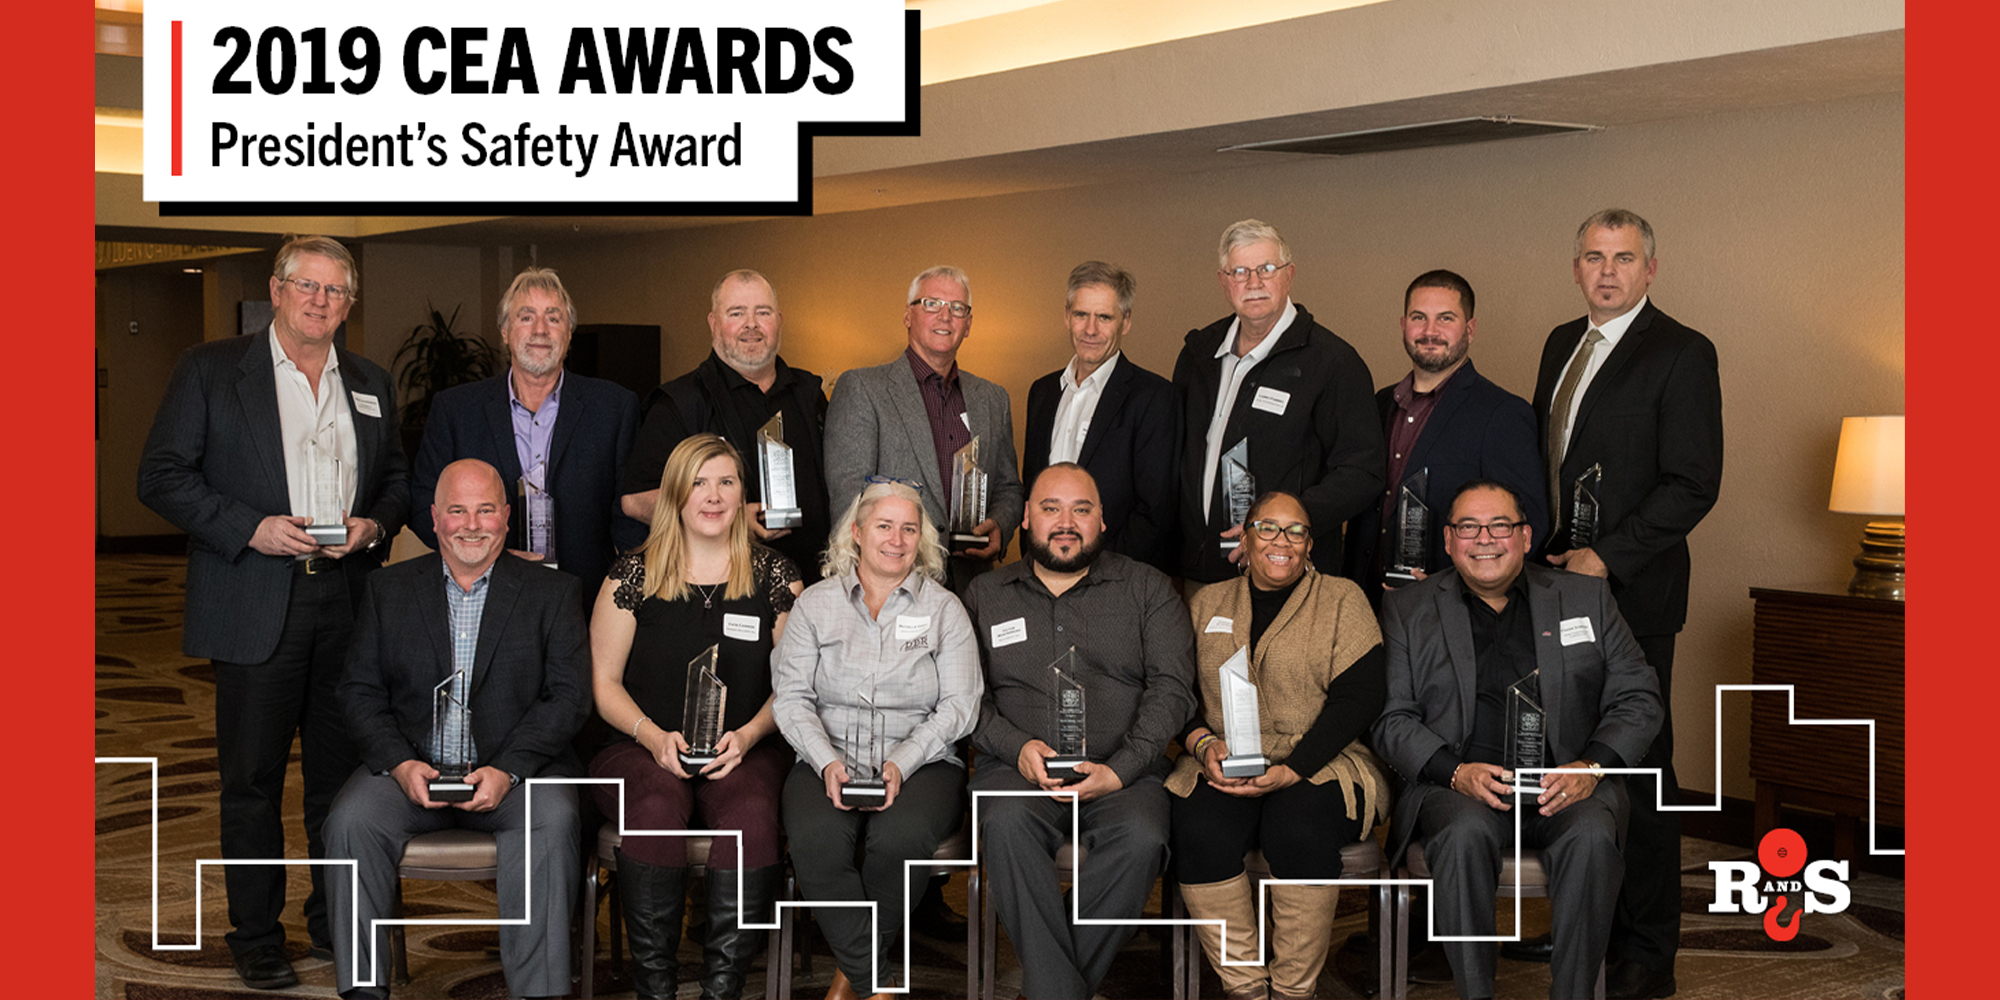 CEA Honors Our Culture of Safety